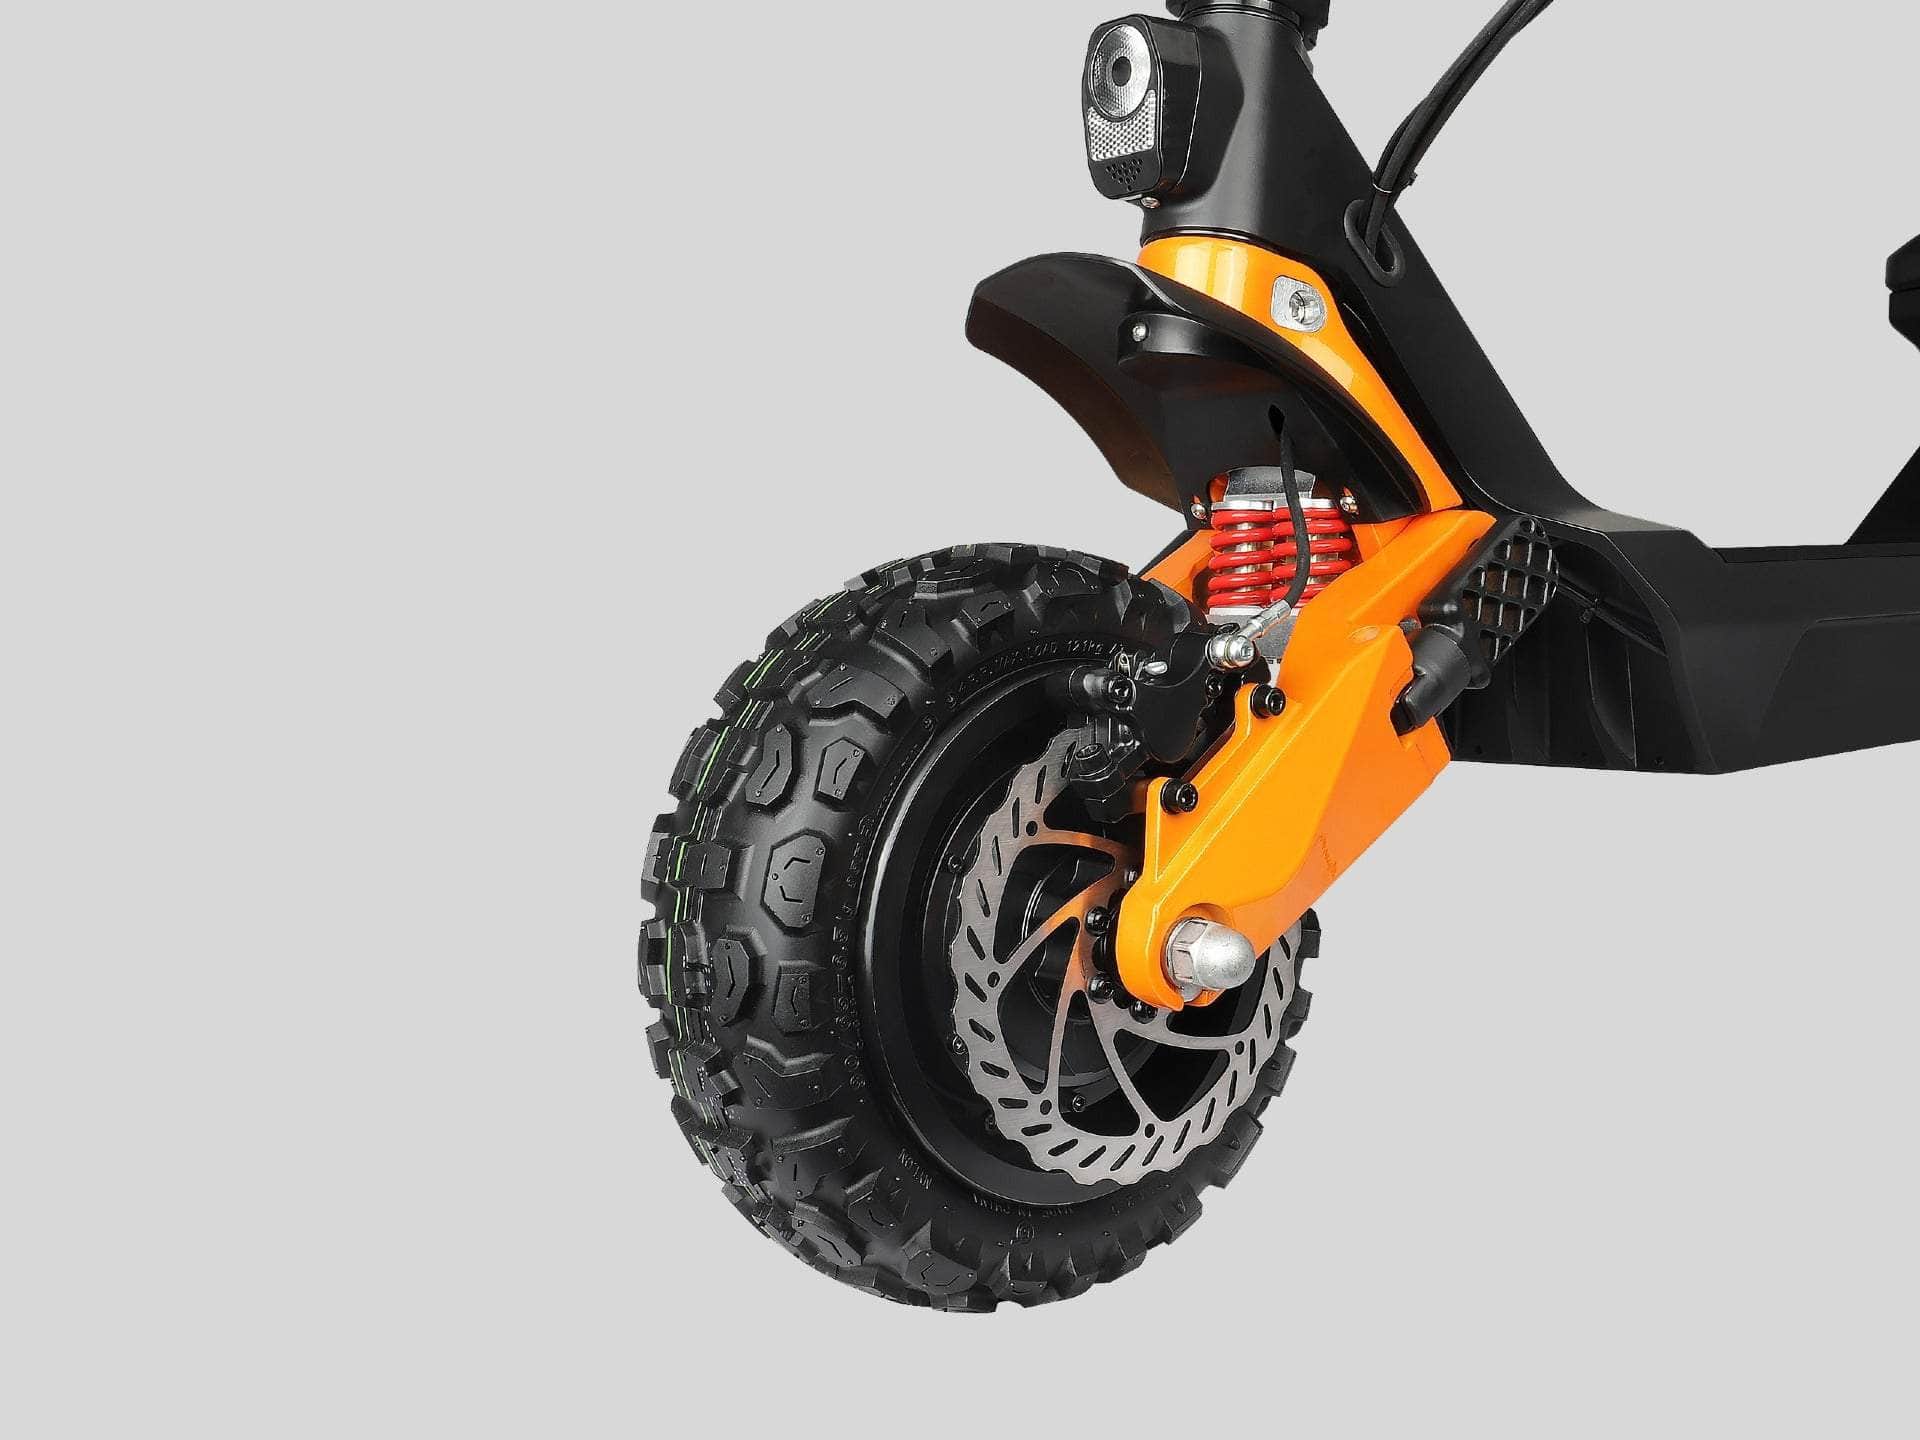 The Fiido Beast sit-or-stand electric scooter is also a two-wheeled electric go-kart